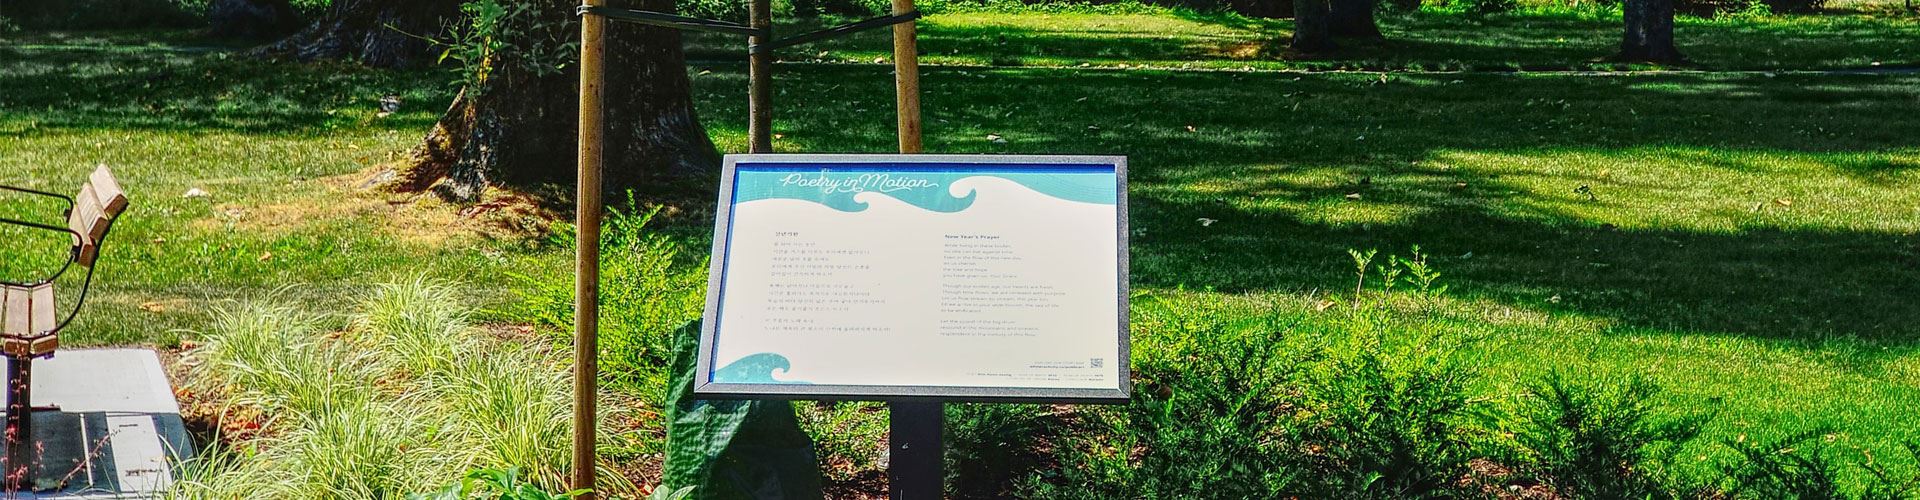 poetry sign in park